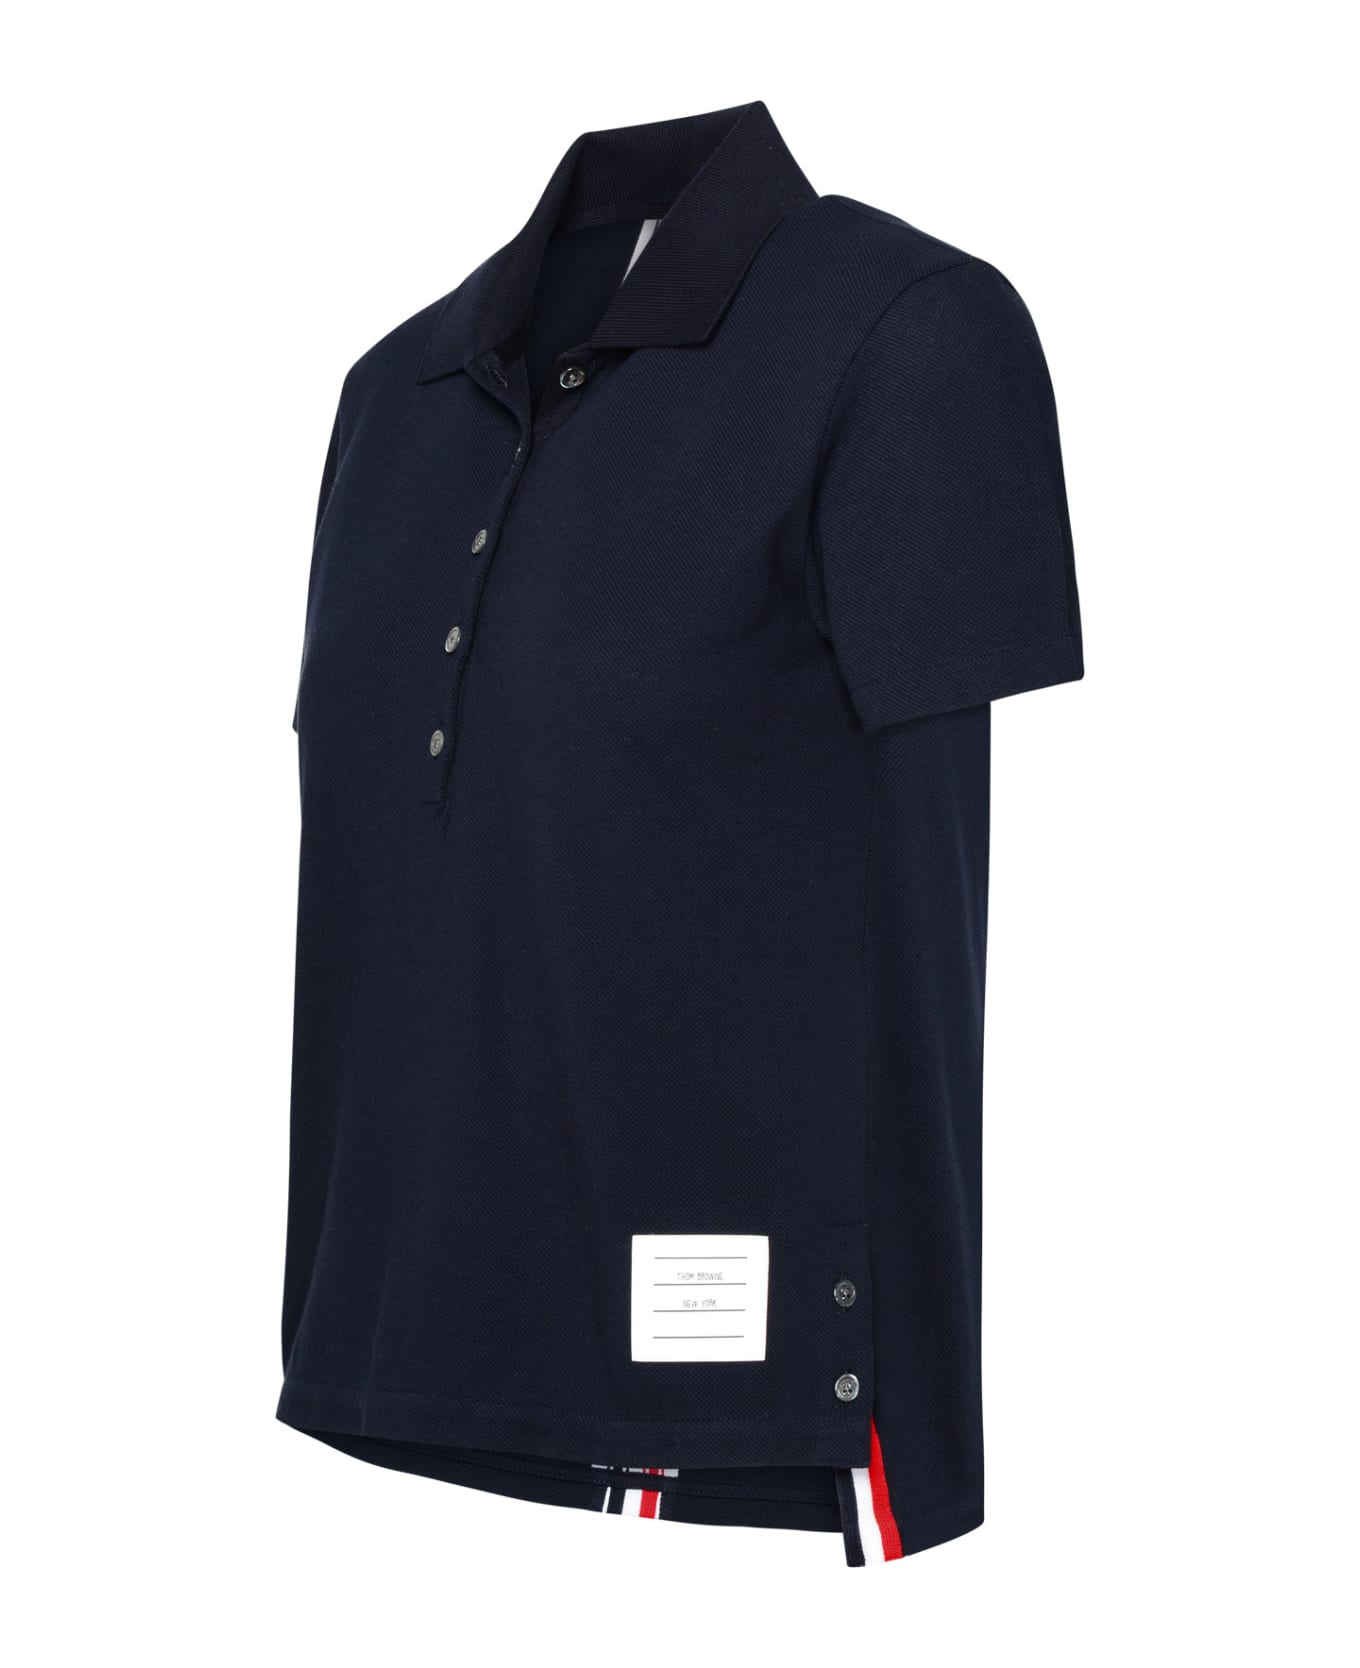 Thom Browne Navy Cotton Polo Shirt - Navy ポロシャツ